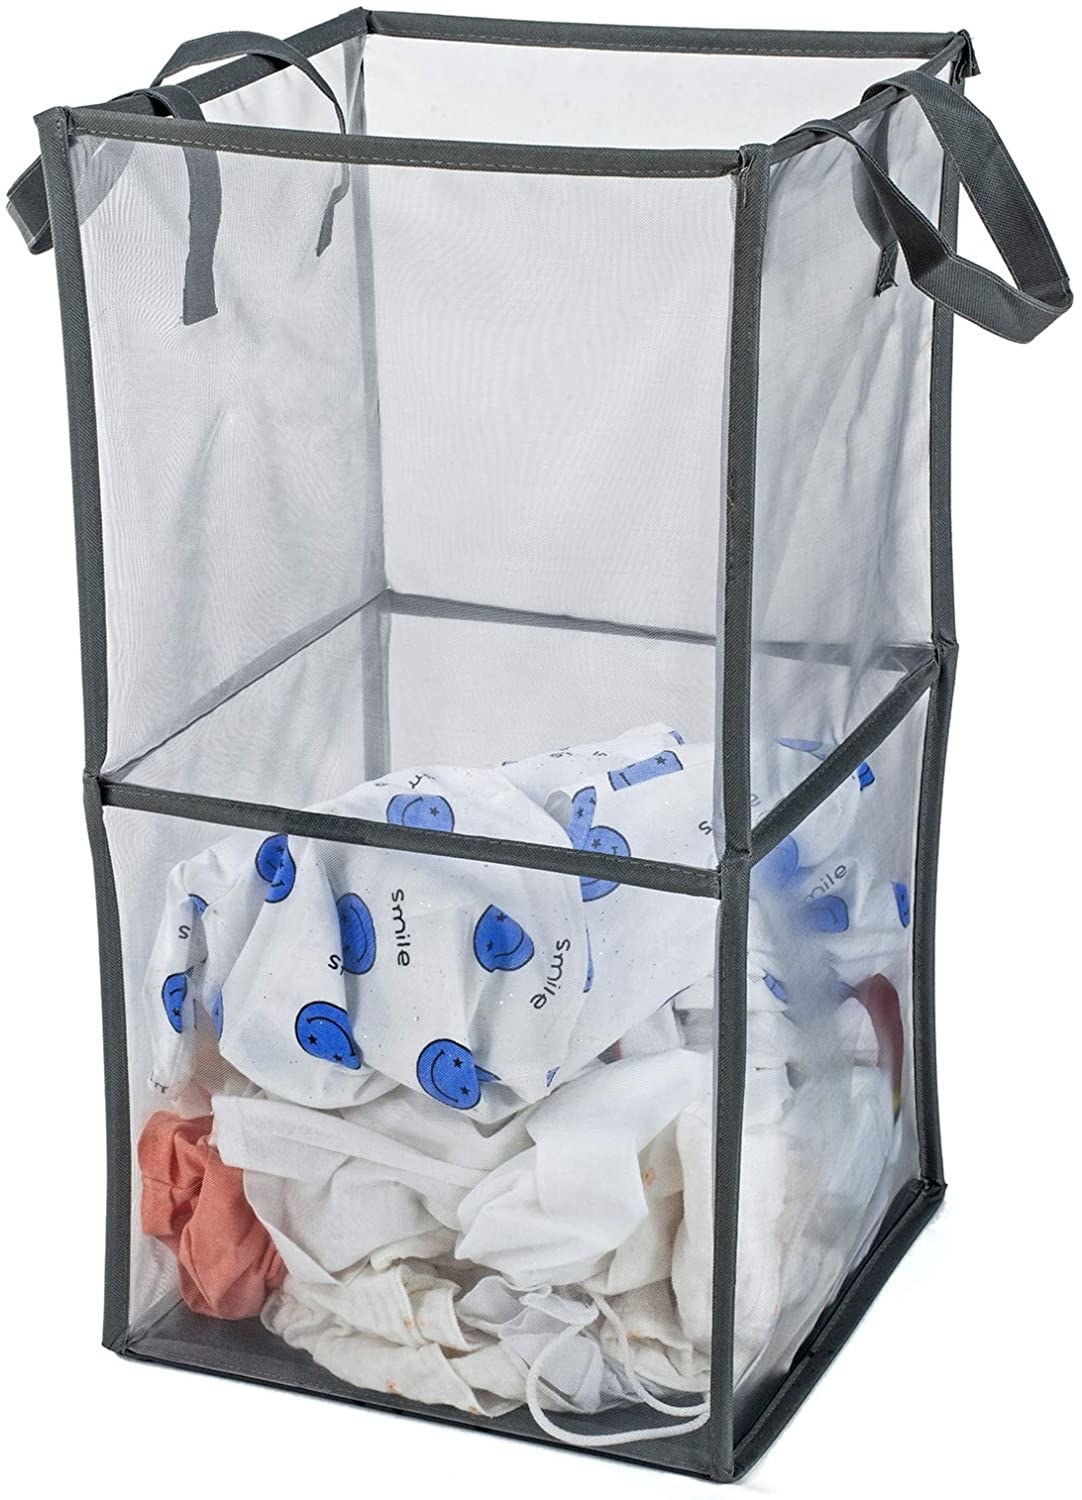 Gray mesh collapsible laundry bin product photo, half-full with clothing.